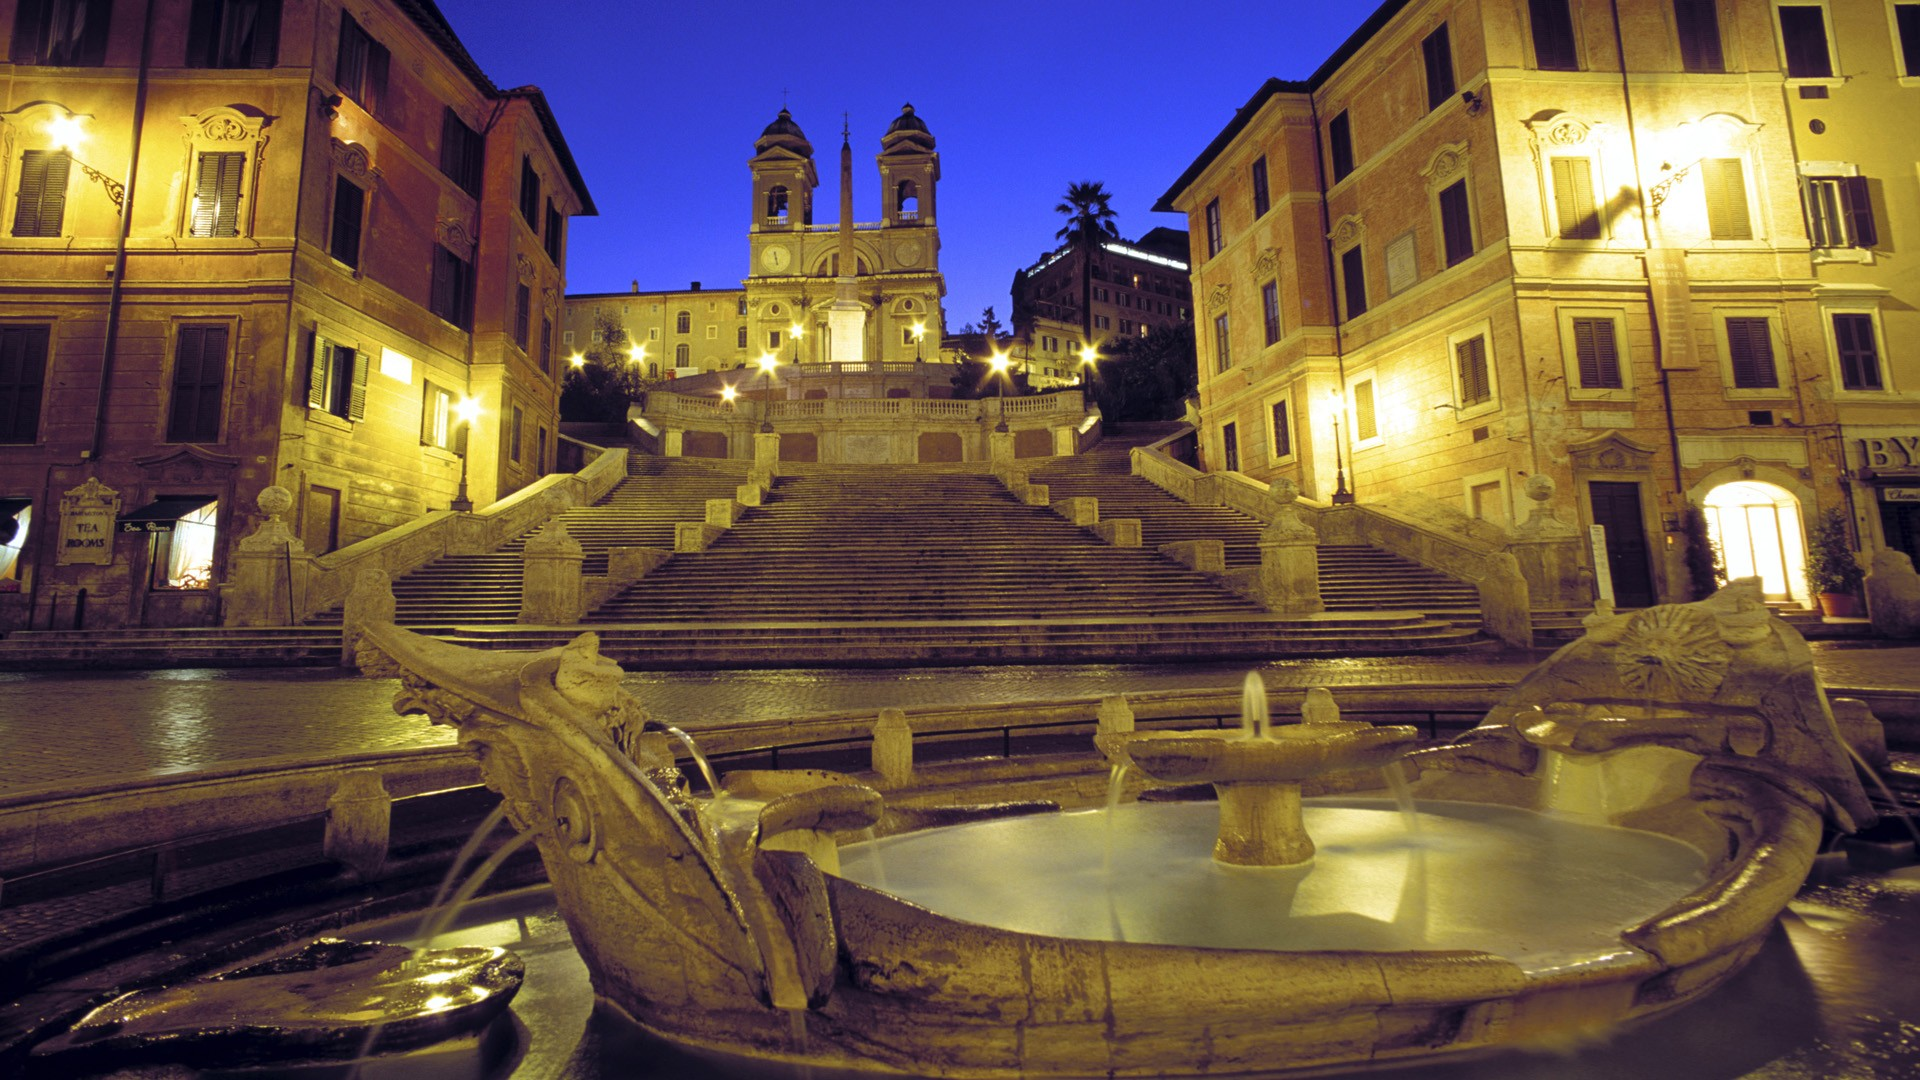 Rate Select Rating Give Spanish Steps Rome Italy